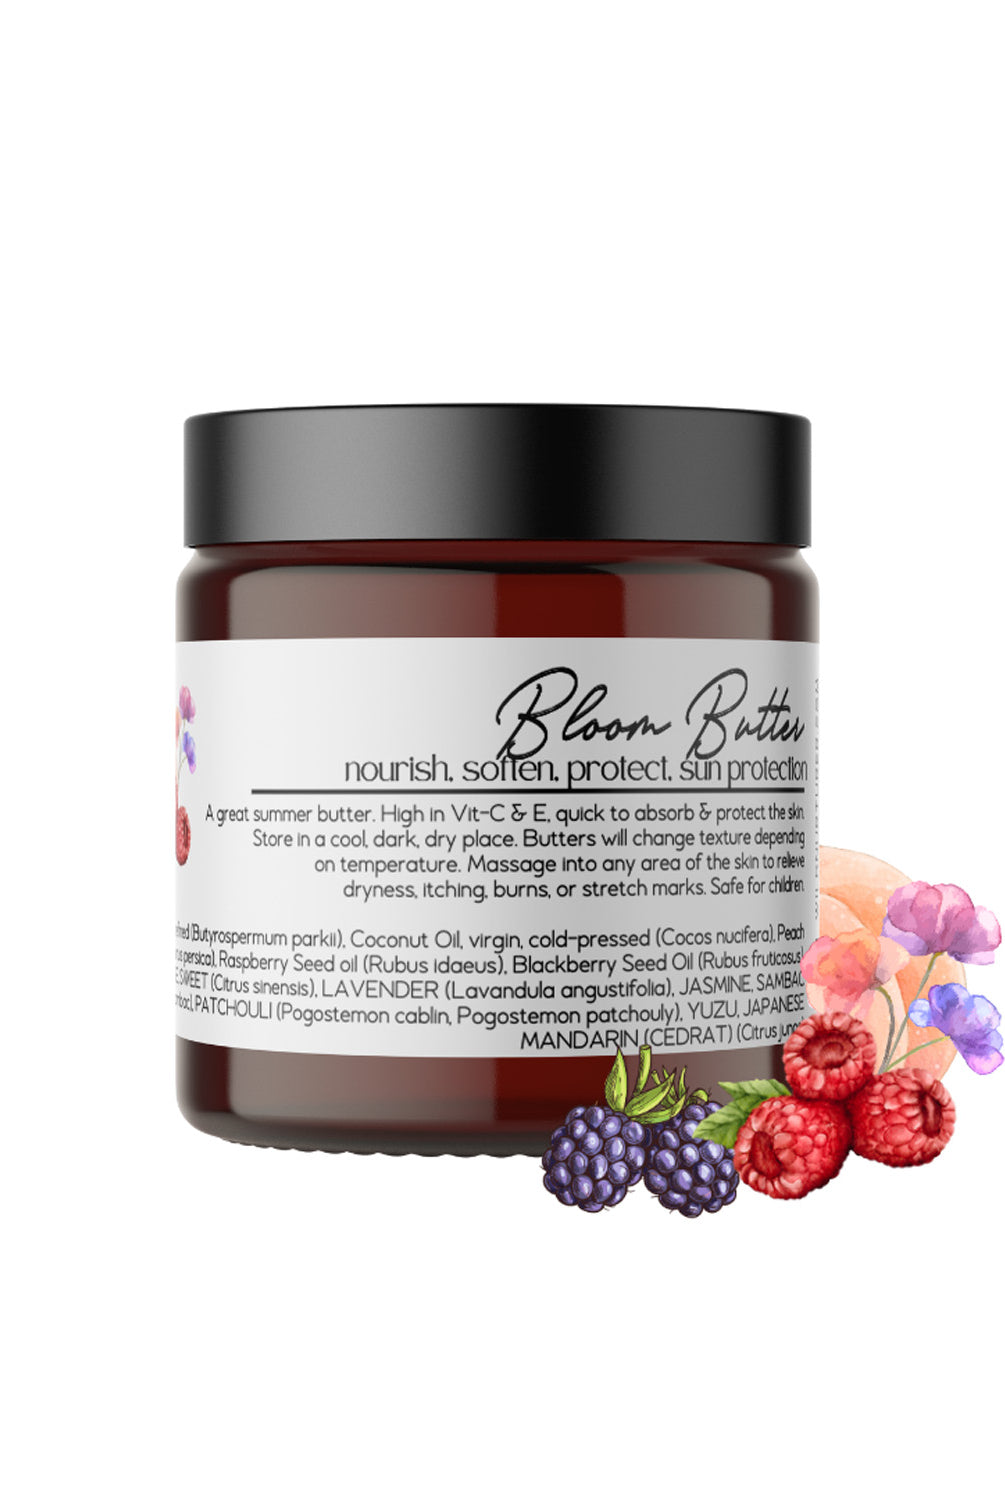 A jar of Bloom - 4oz Whipped Body & Feet Skin Repair Butter by Wild Nurturer Aromatherapy, with essential oil, illustrated berries, and ingredients listed on the label.